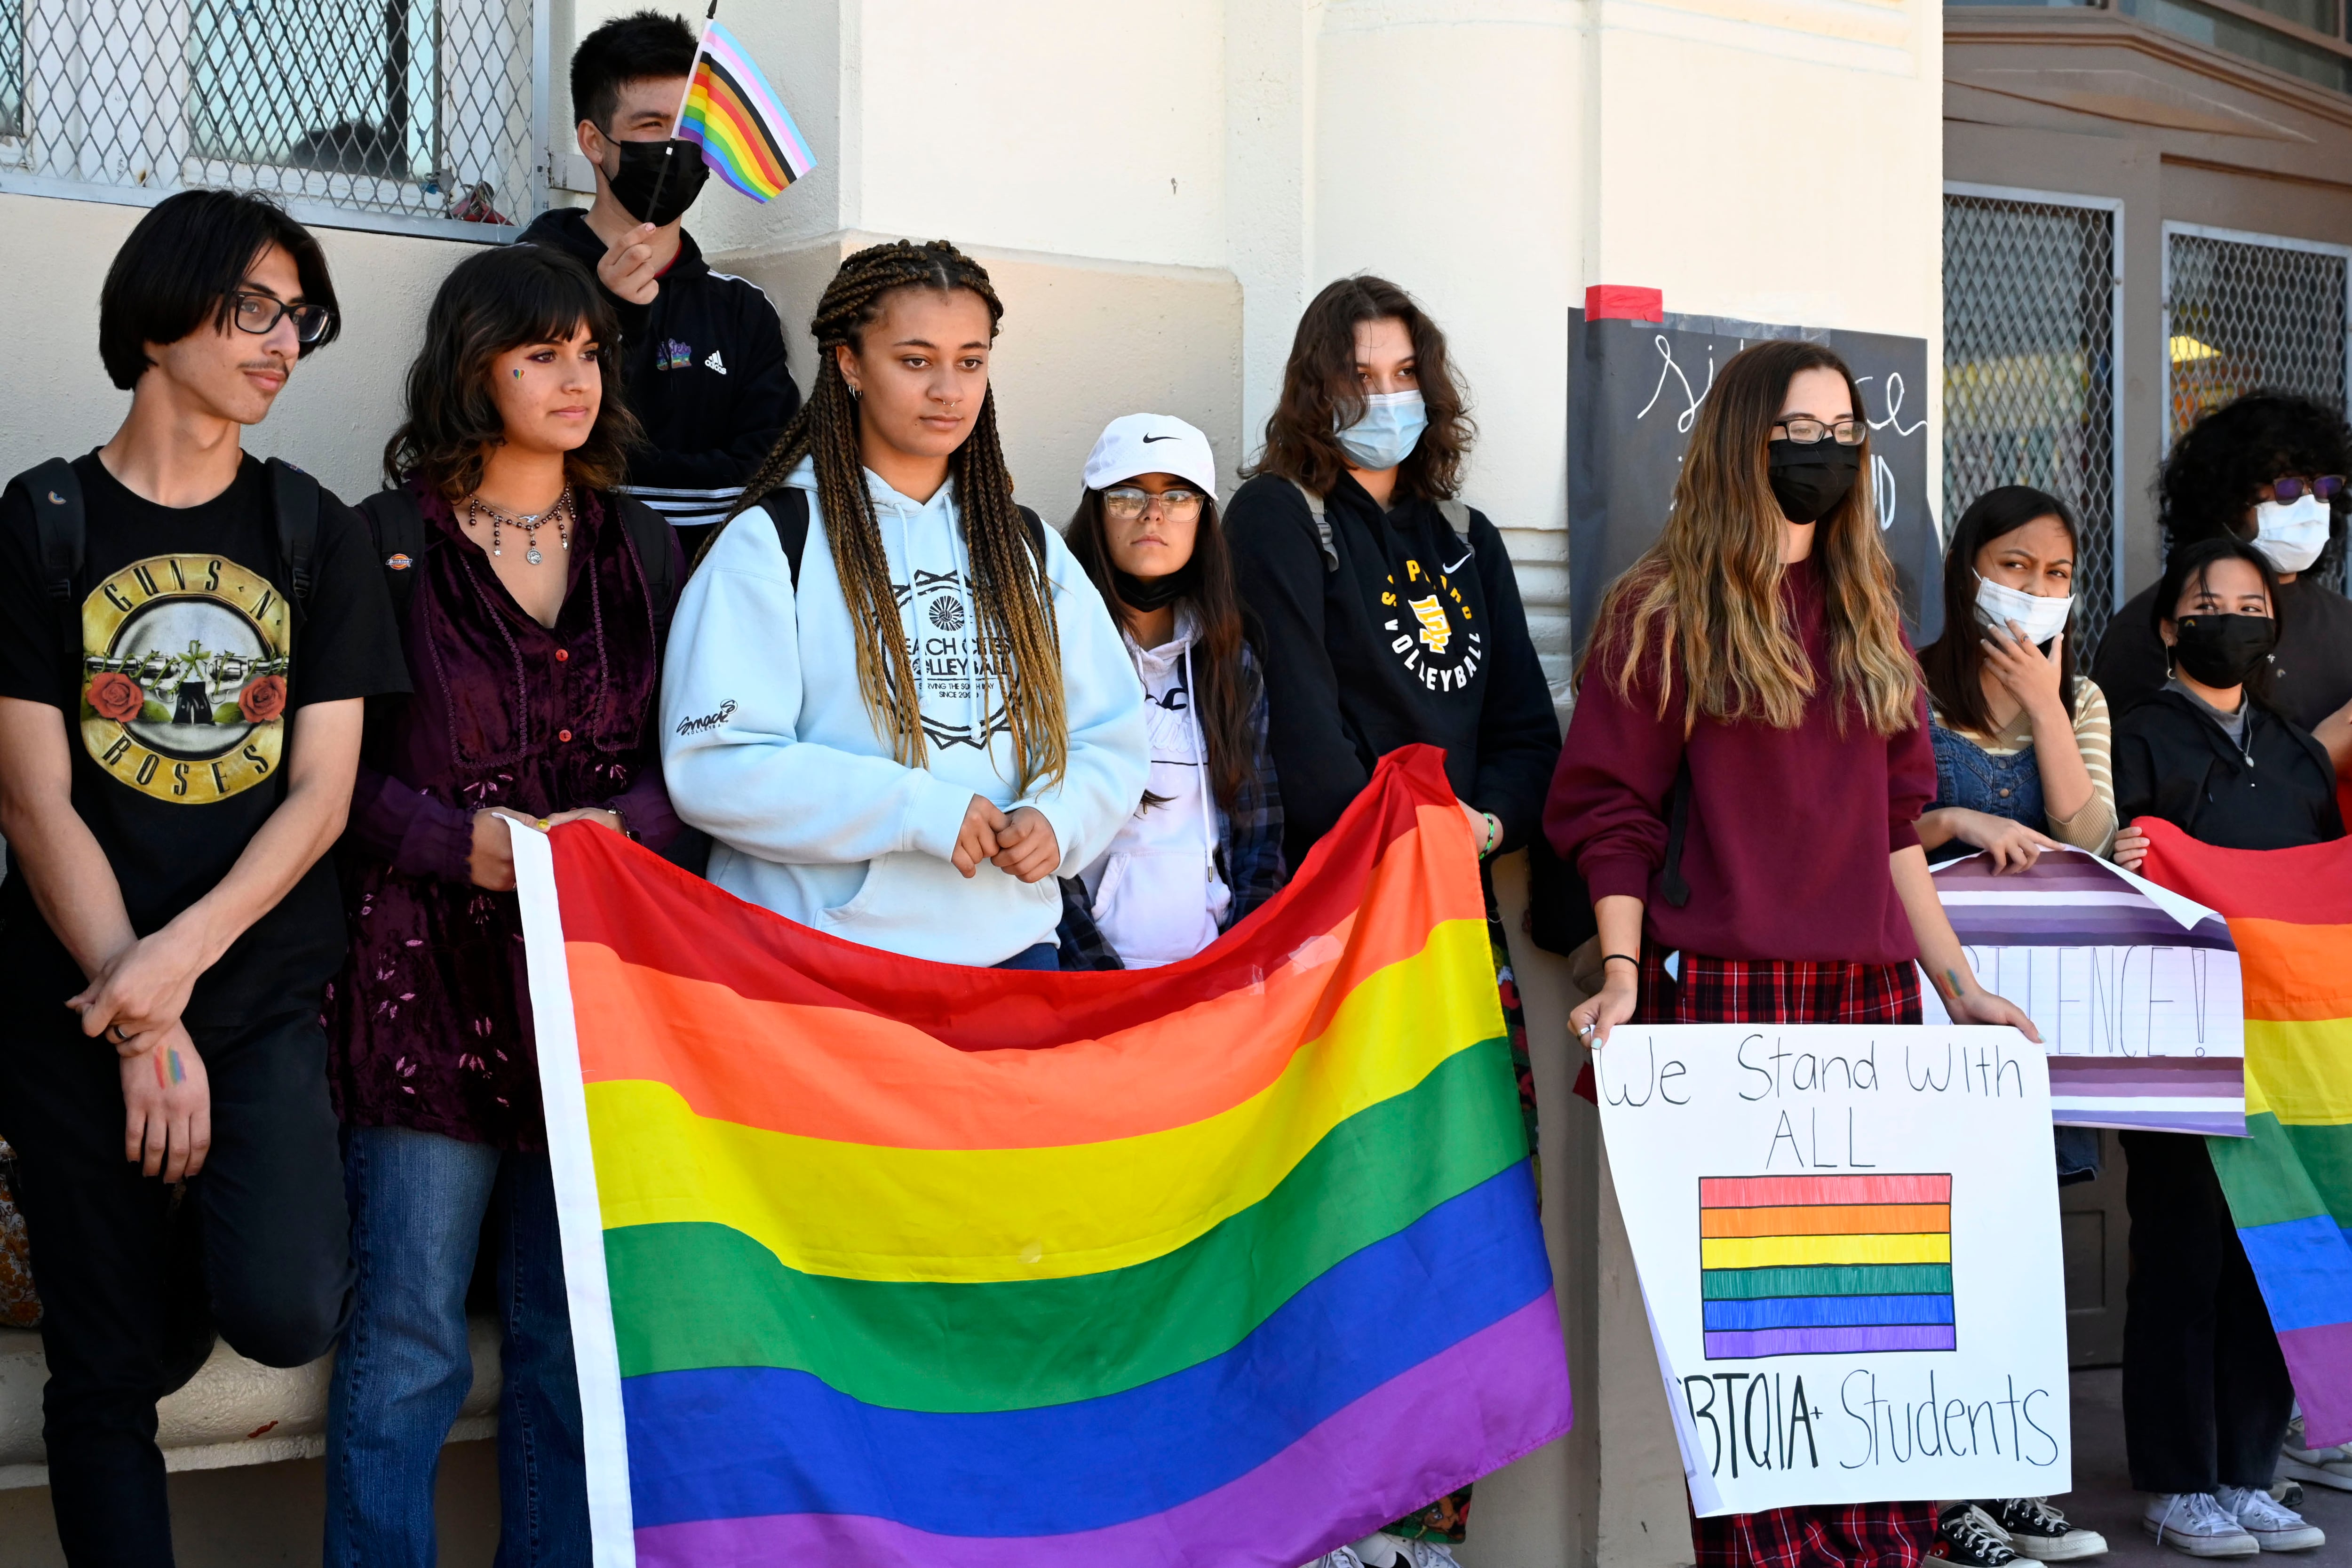 Students protest in support of the LGBTQIA community outside of their school, holding Pride flags and signs.